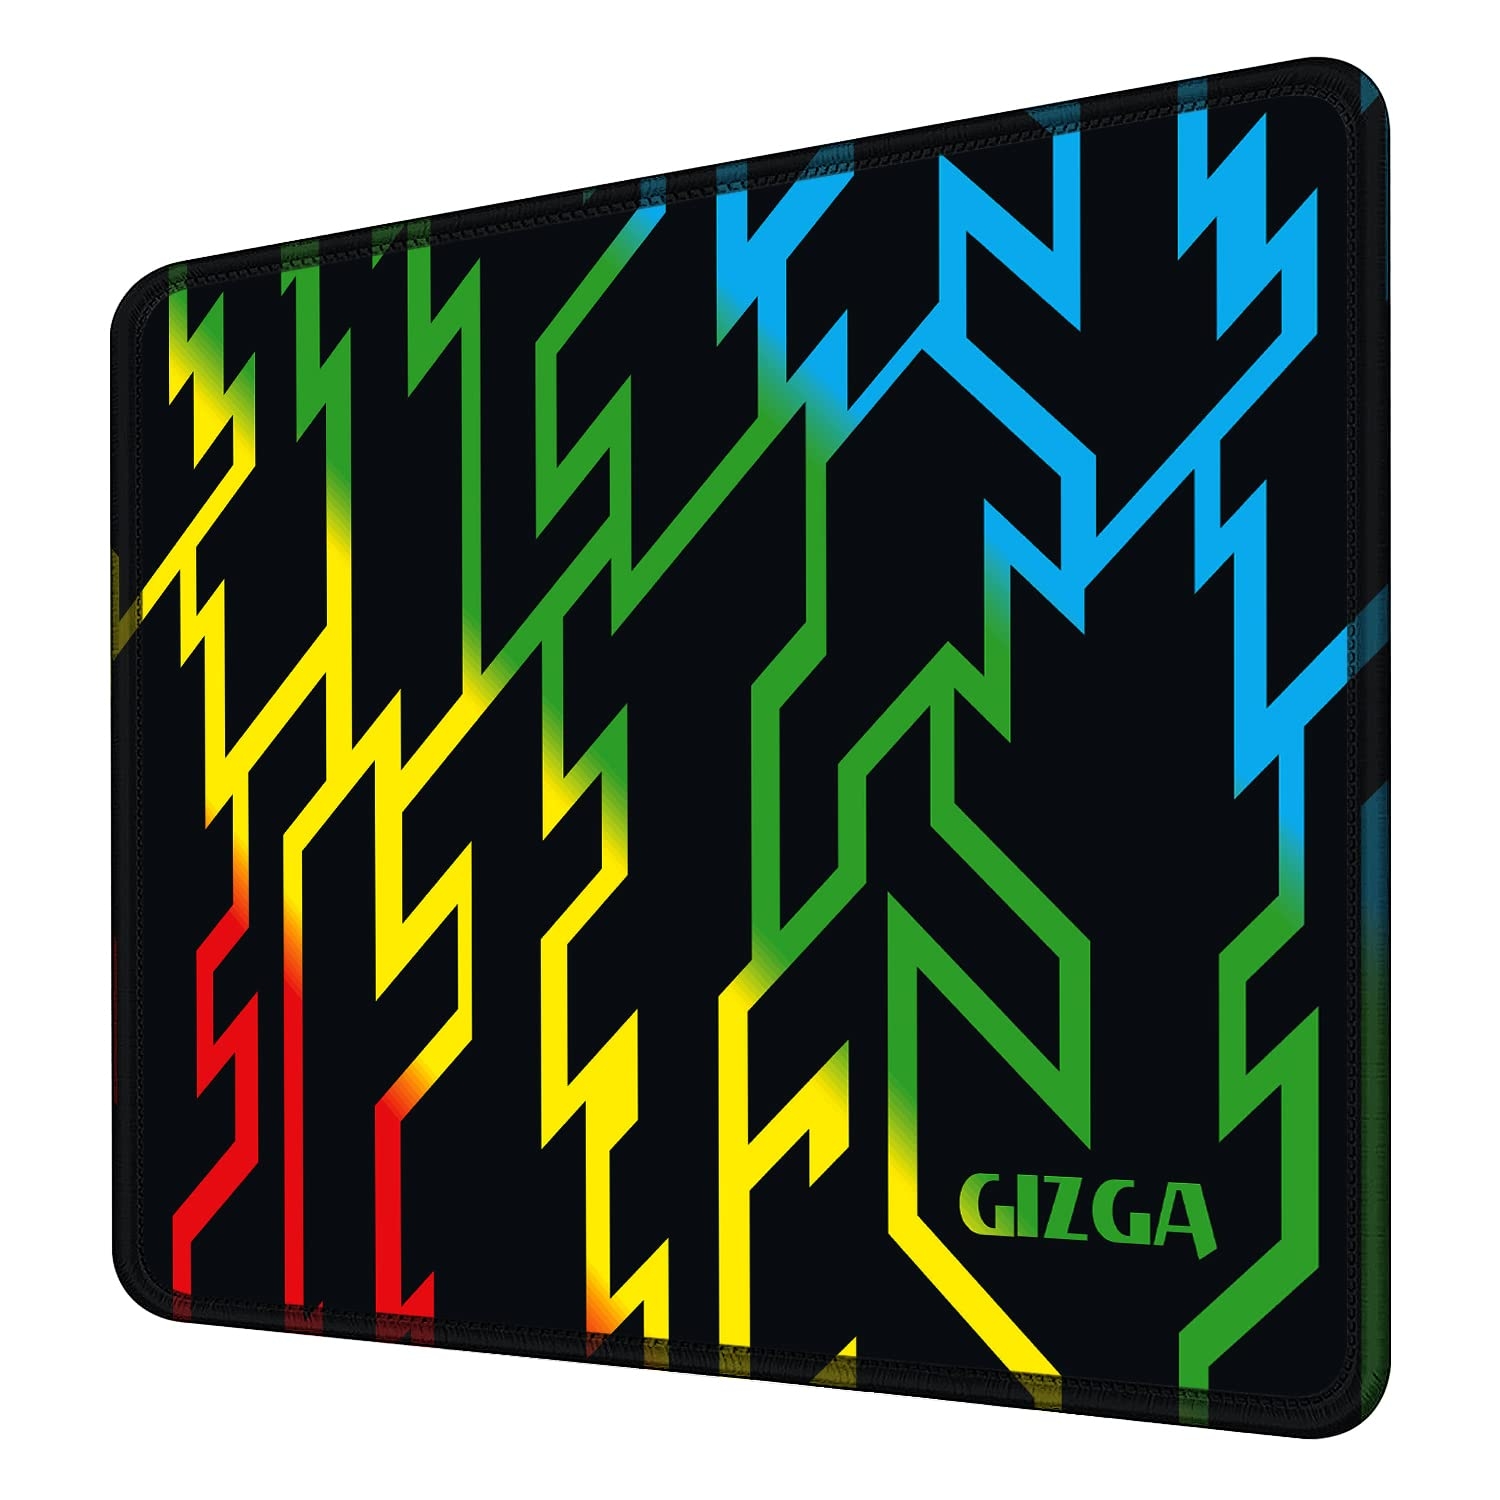 GIZGA Essentials 25x21cm Gaming Mouse Pad for Smooth Control, Antifray Stitched Embroidery Edges, Anti-Slip Rubber Base